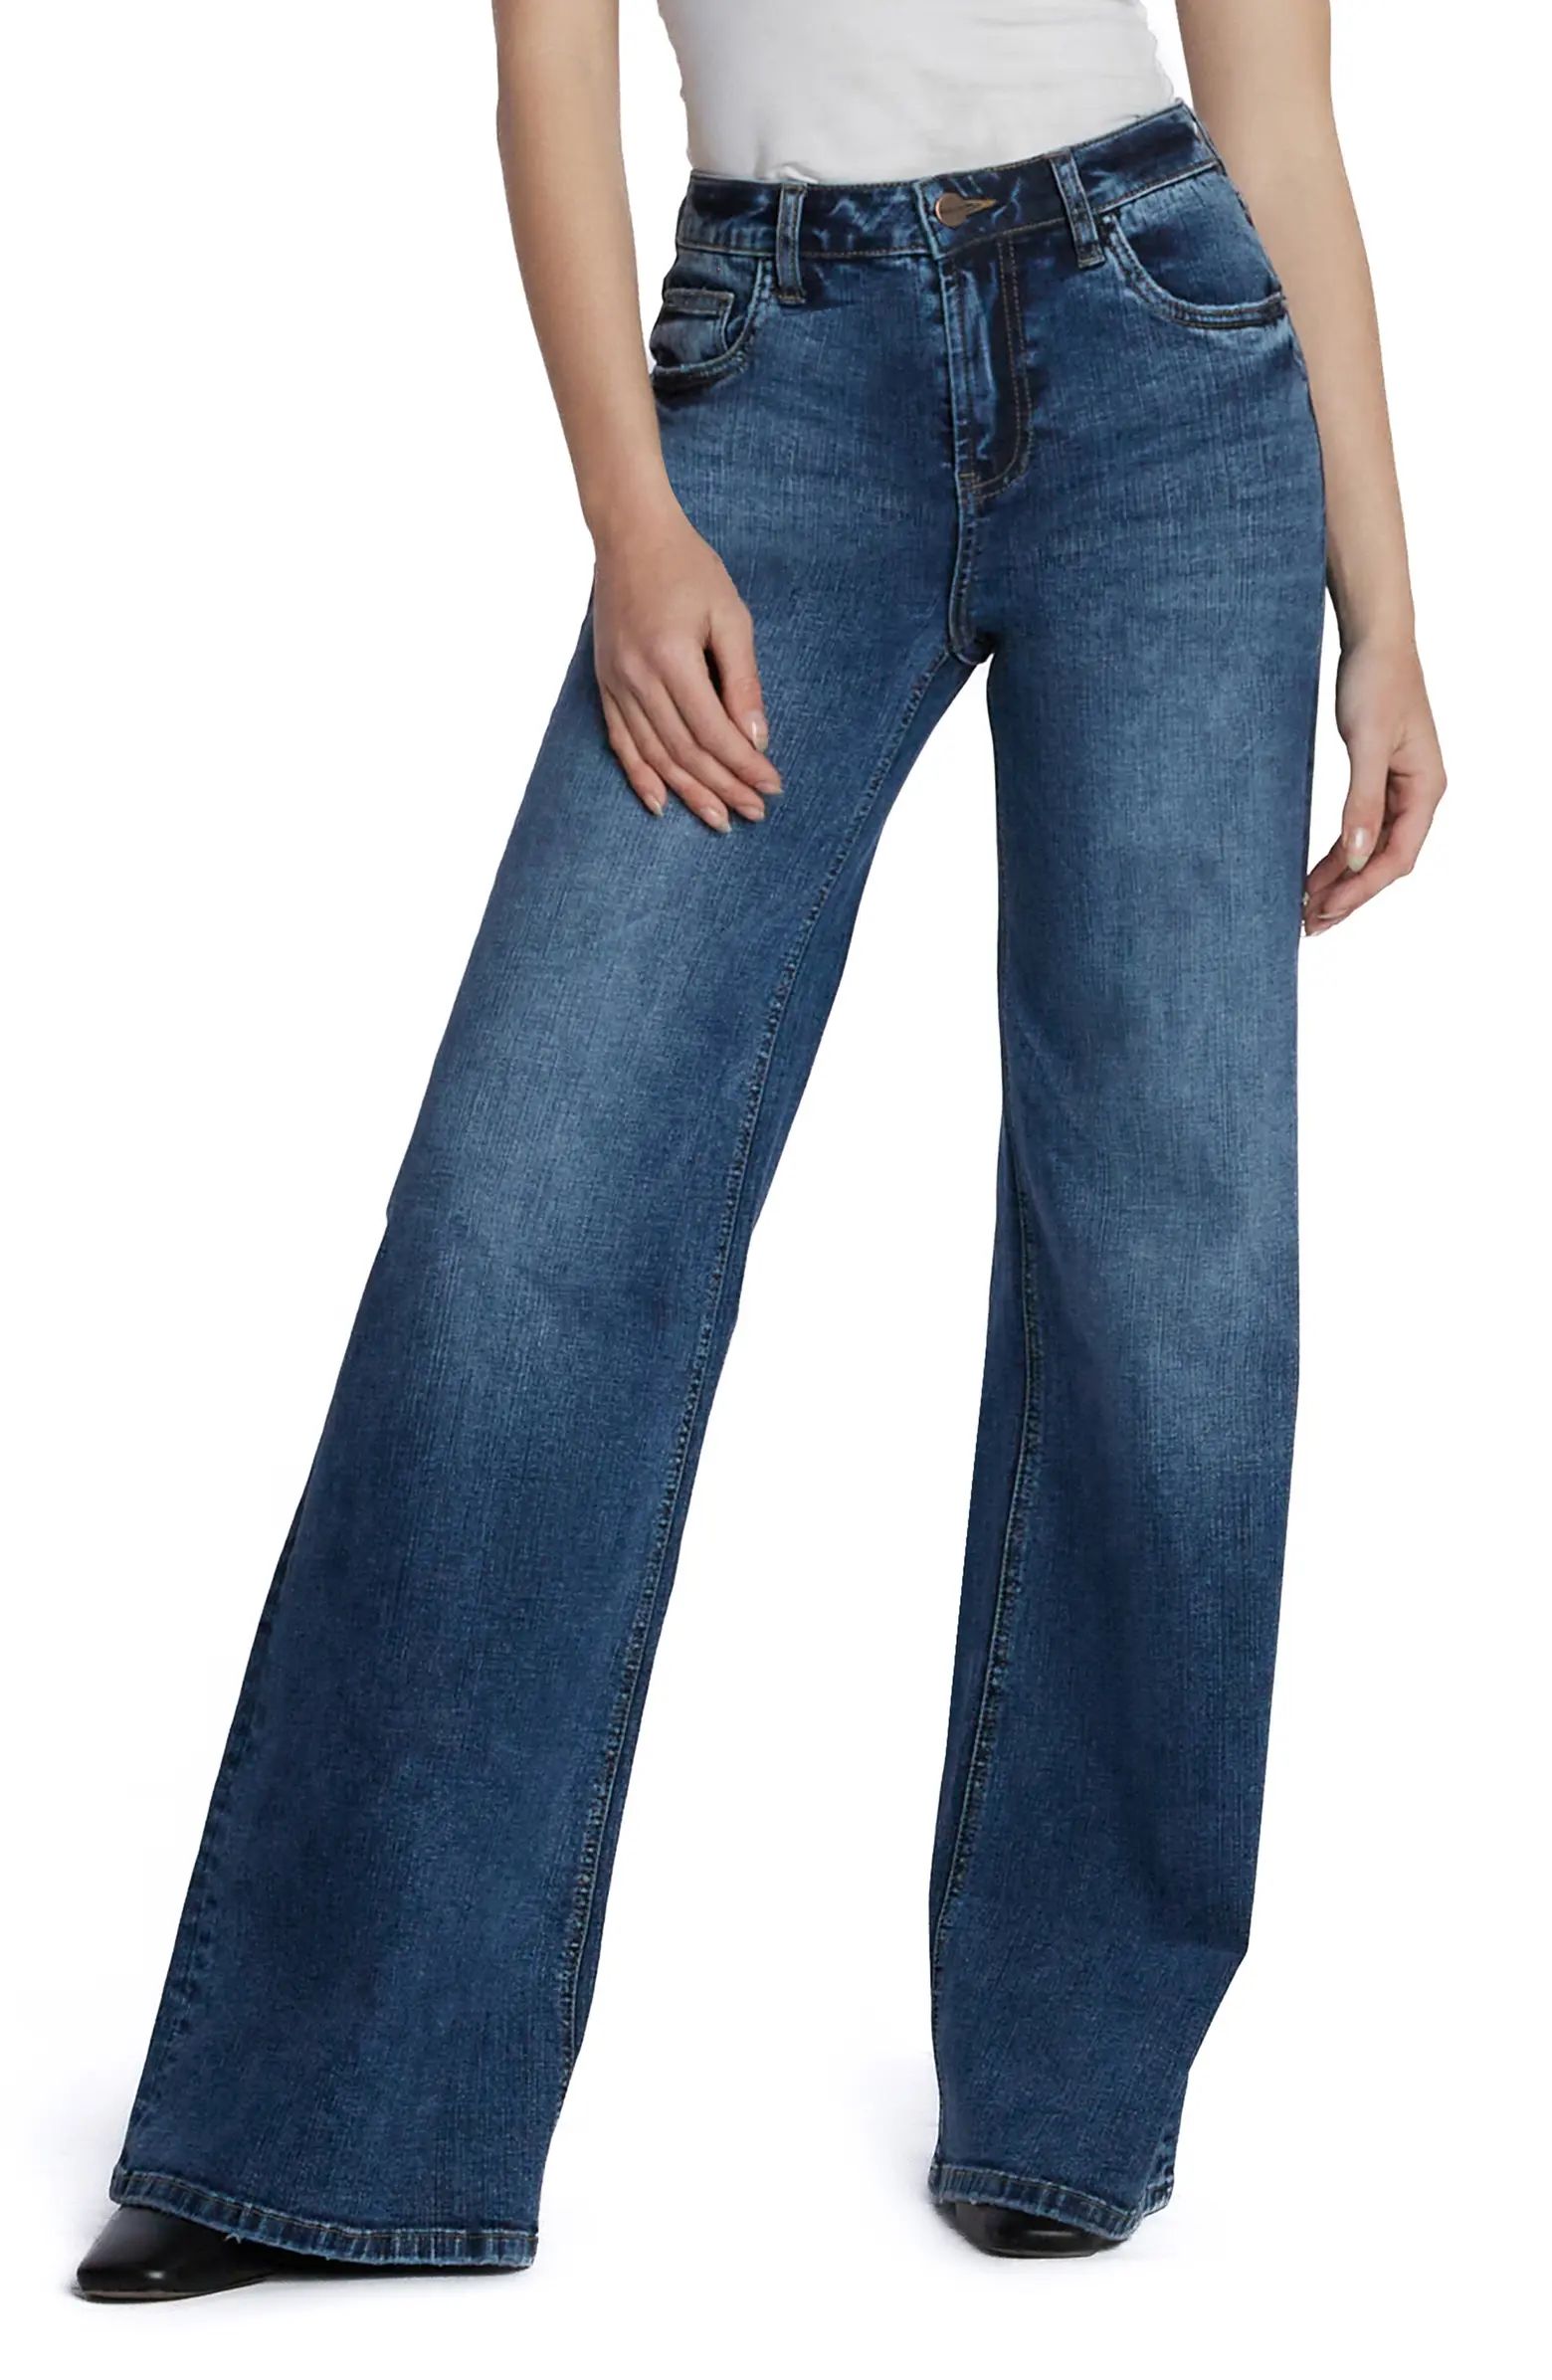 HINT OF BLU Myra Mid Rise Wide Leg Jeans | Nordstrom | Nordstrom